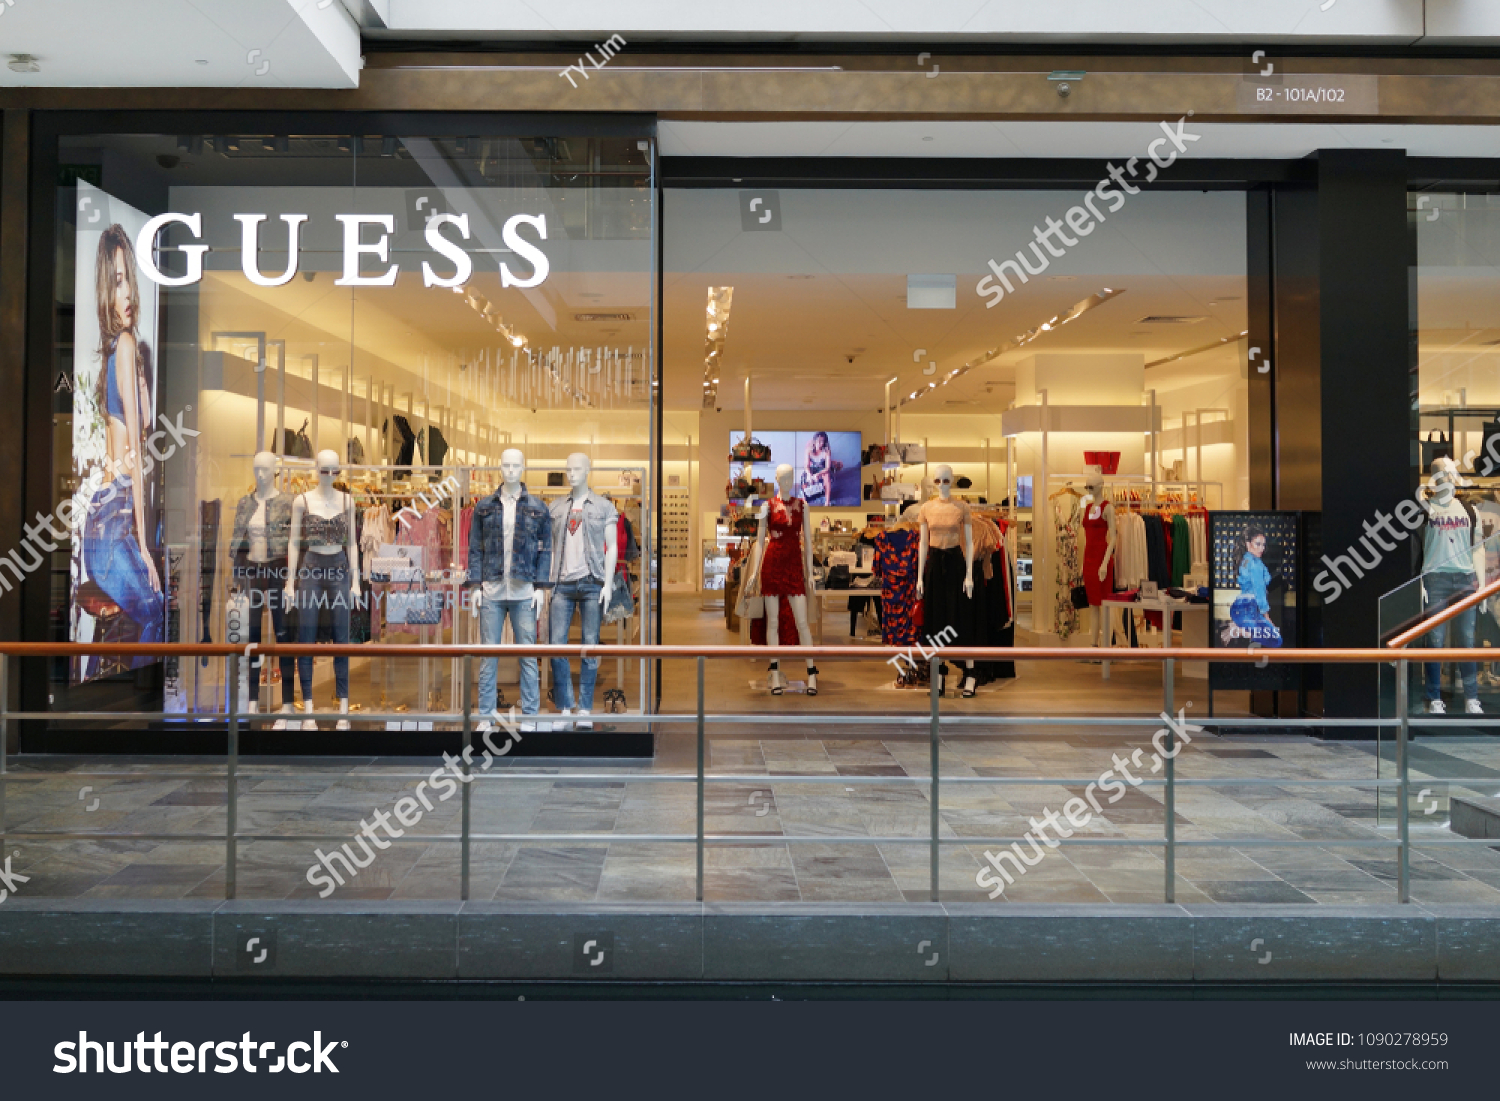 Singapore 22 2018 Guess Store Stock (Edit Now) 1090278959